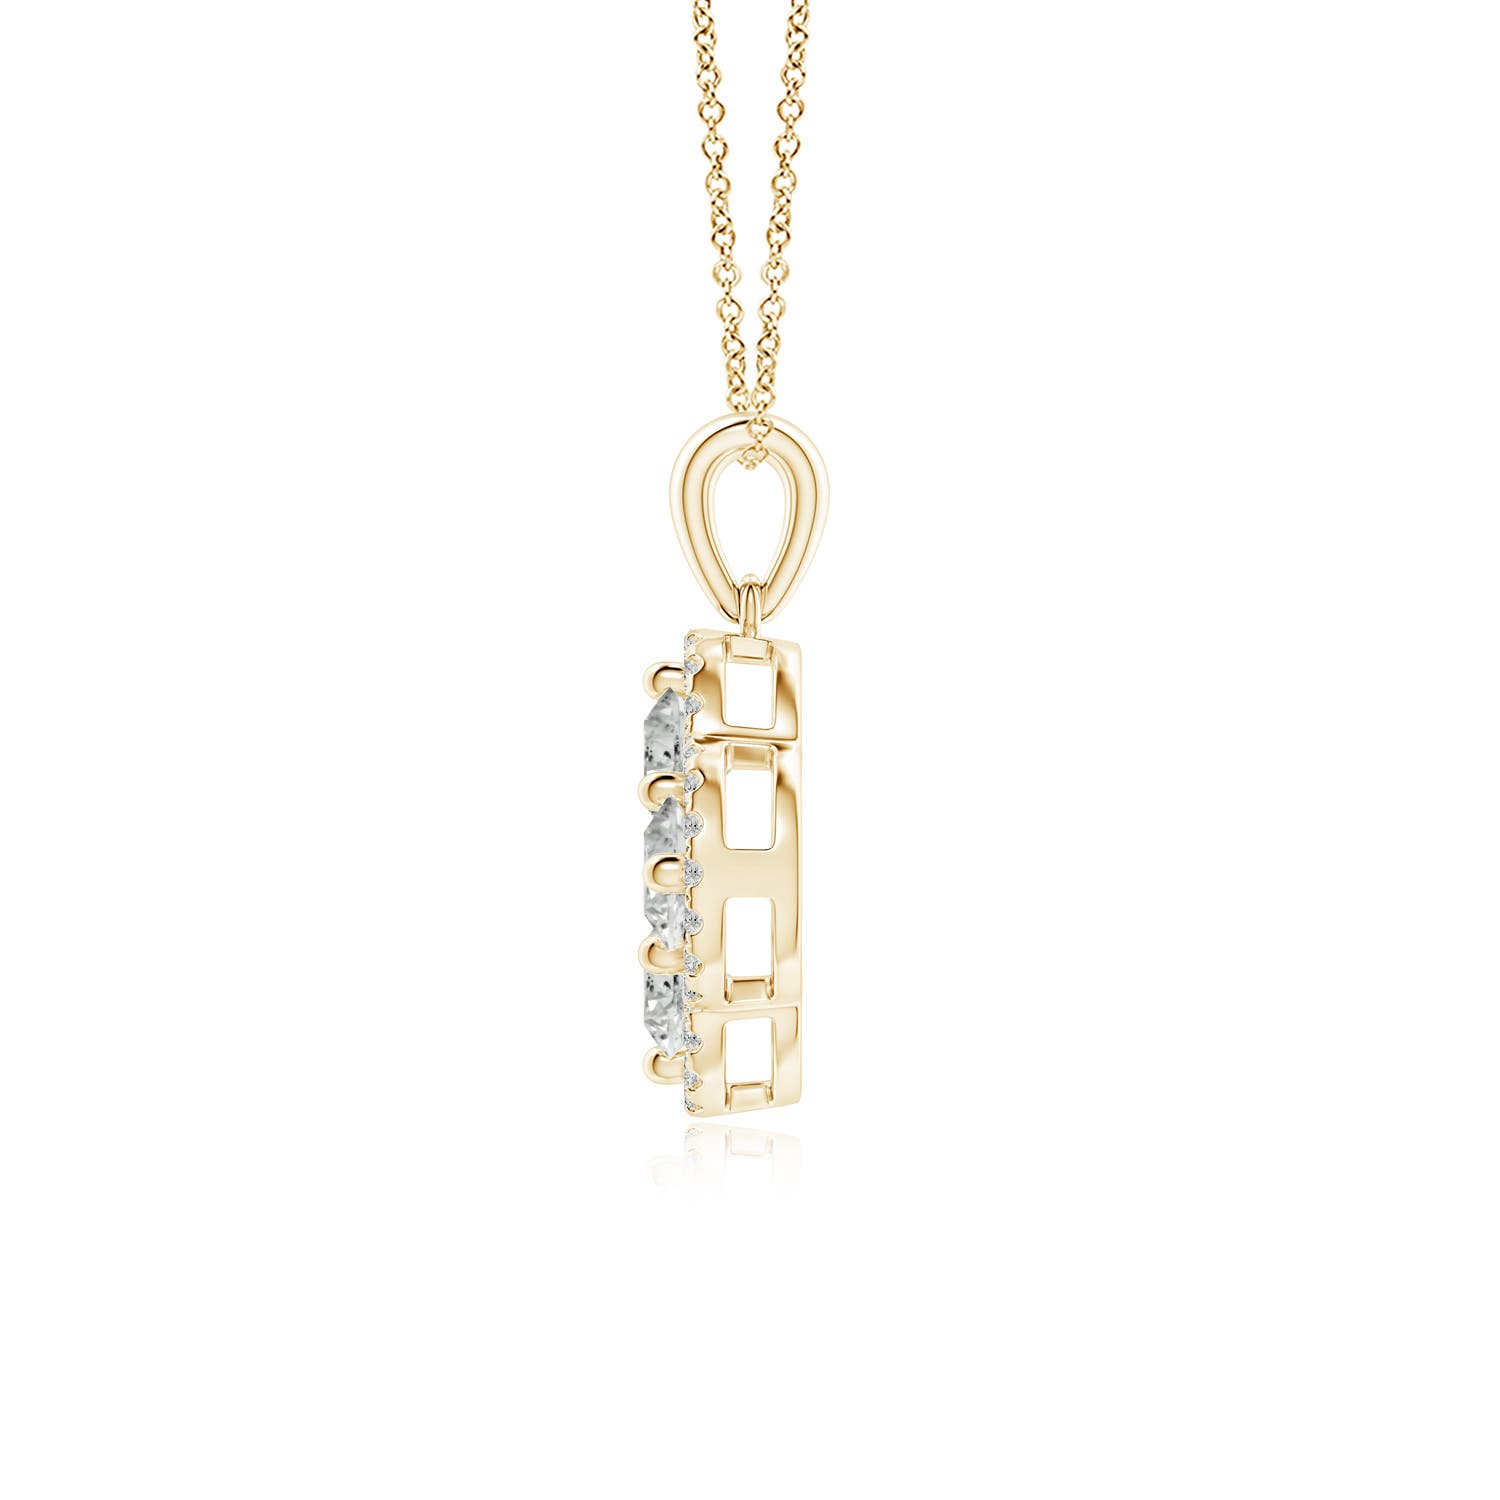 K, I3 / 1.16 CT / 18 KT Yellow Gold